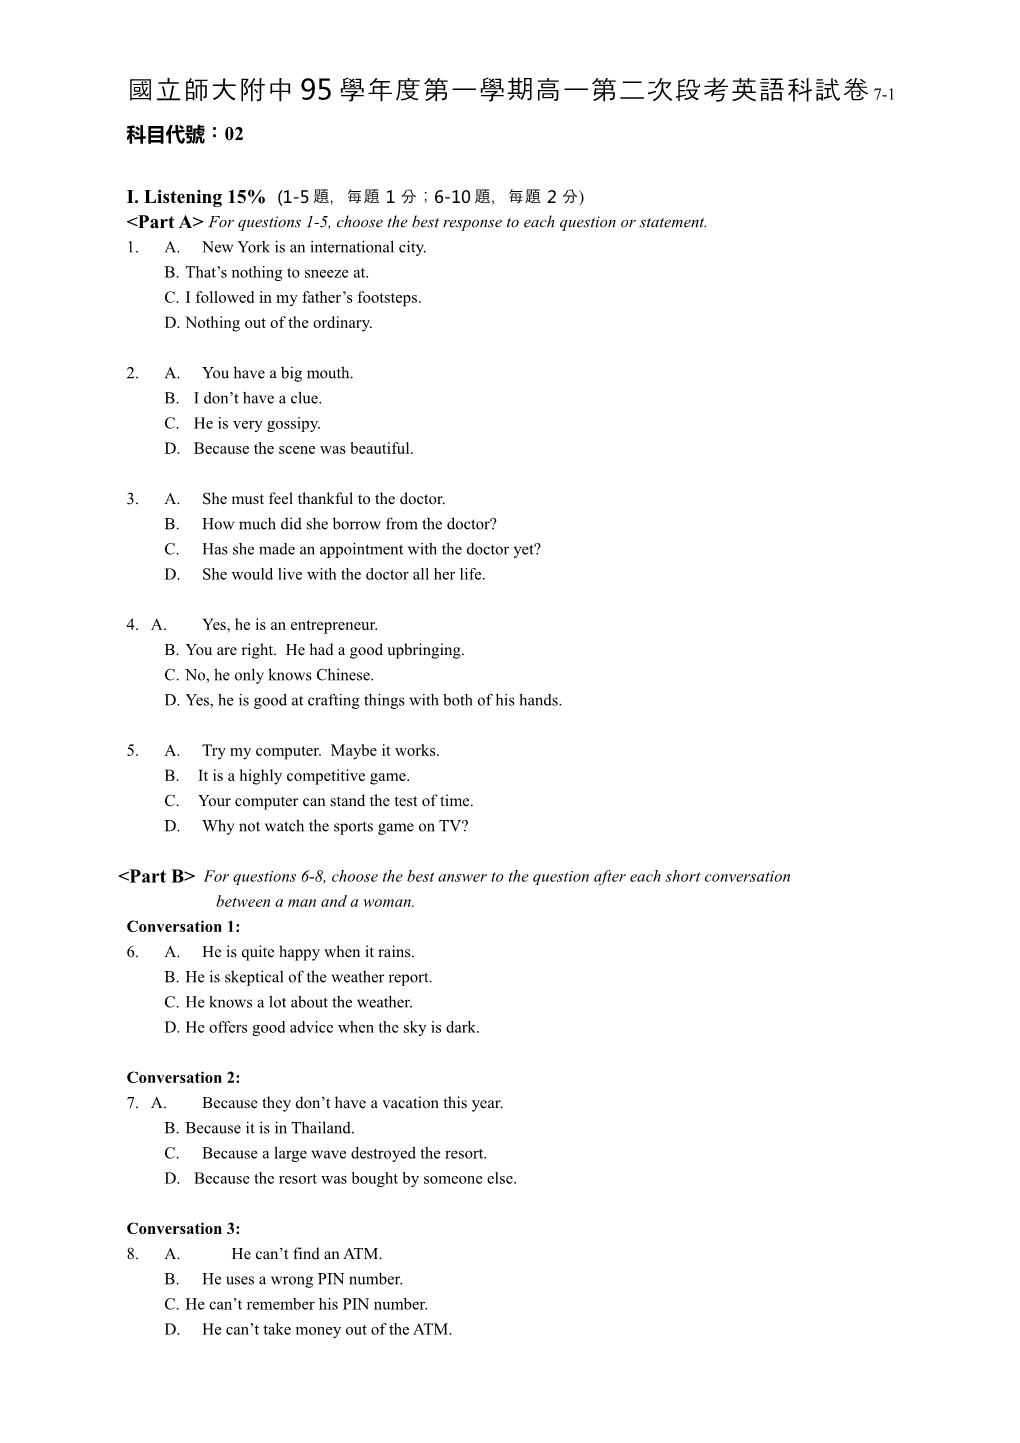 &lt;Part A&gt; for Questions 1-5, Choose the Best Response to Each Question Or Statement